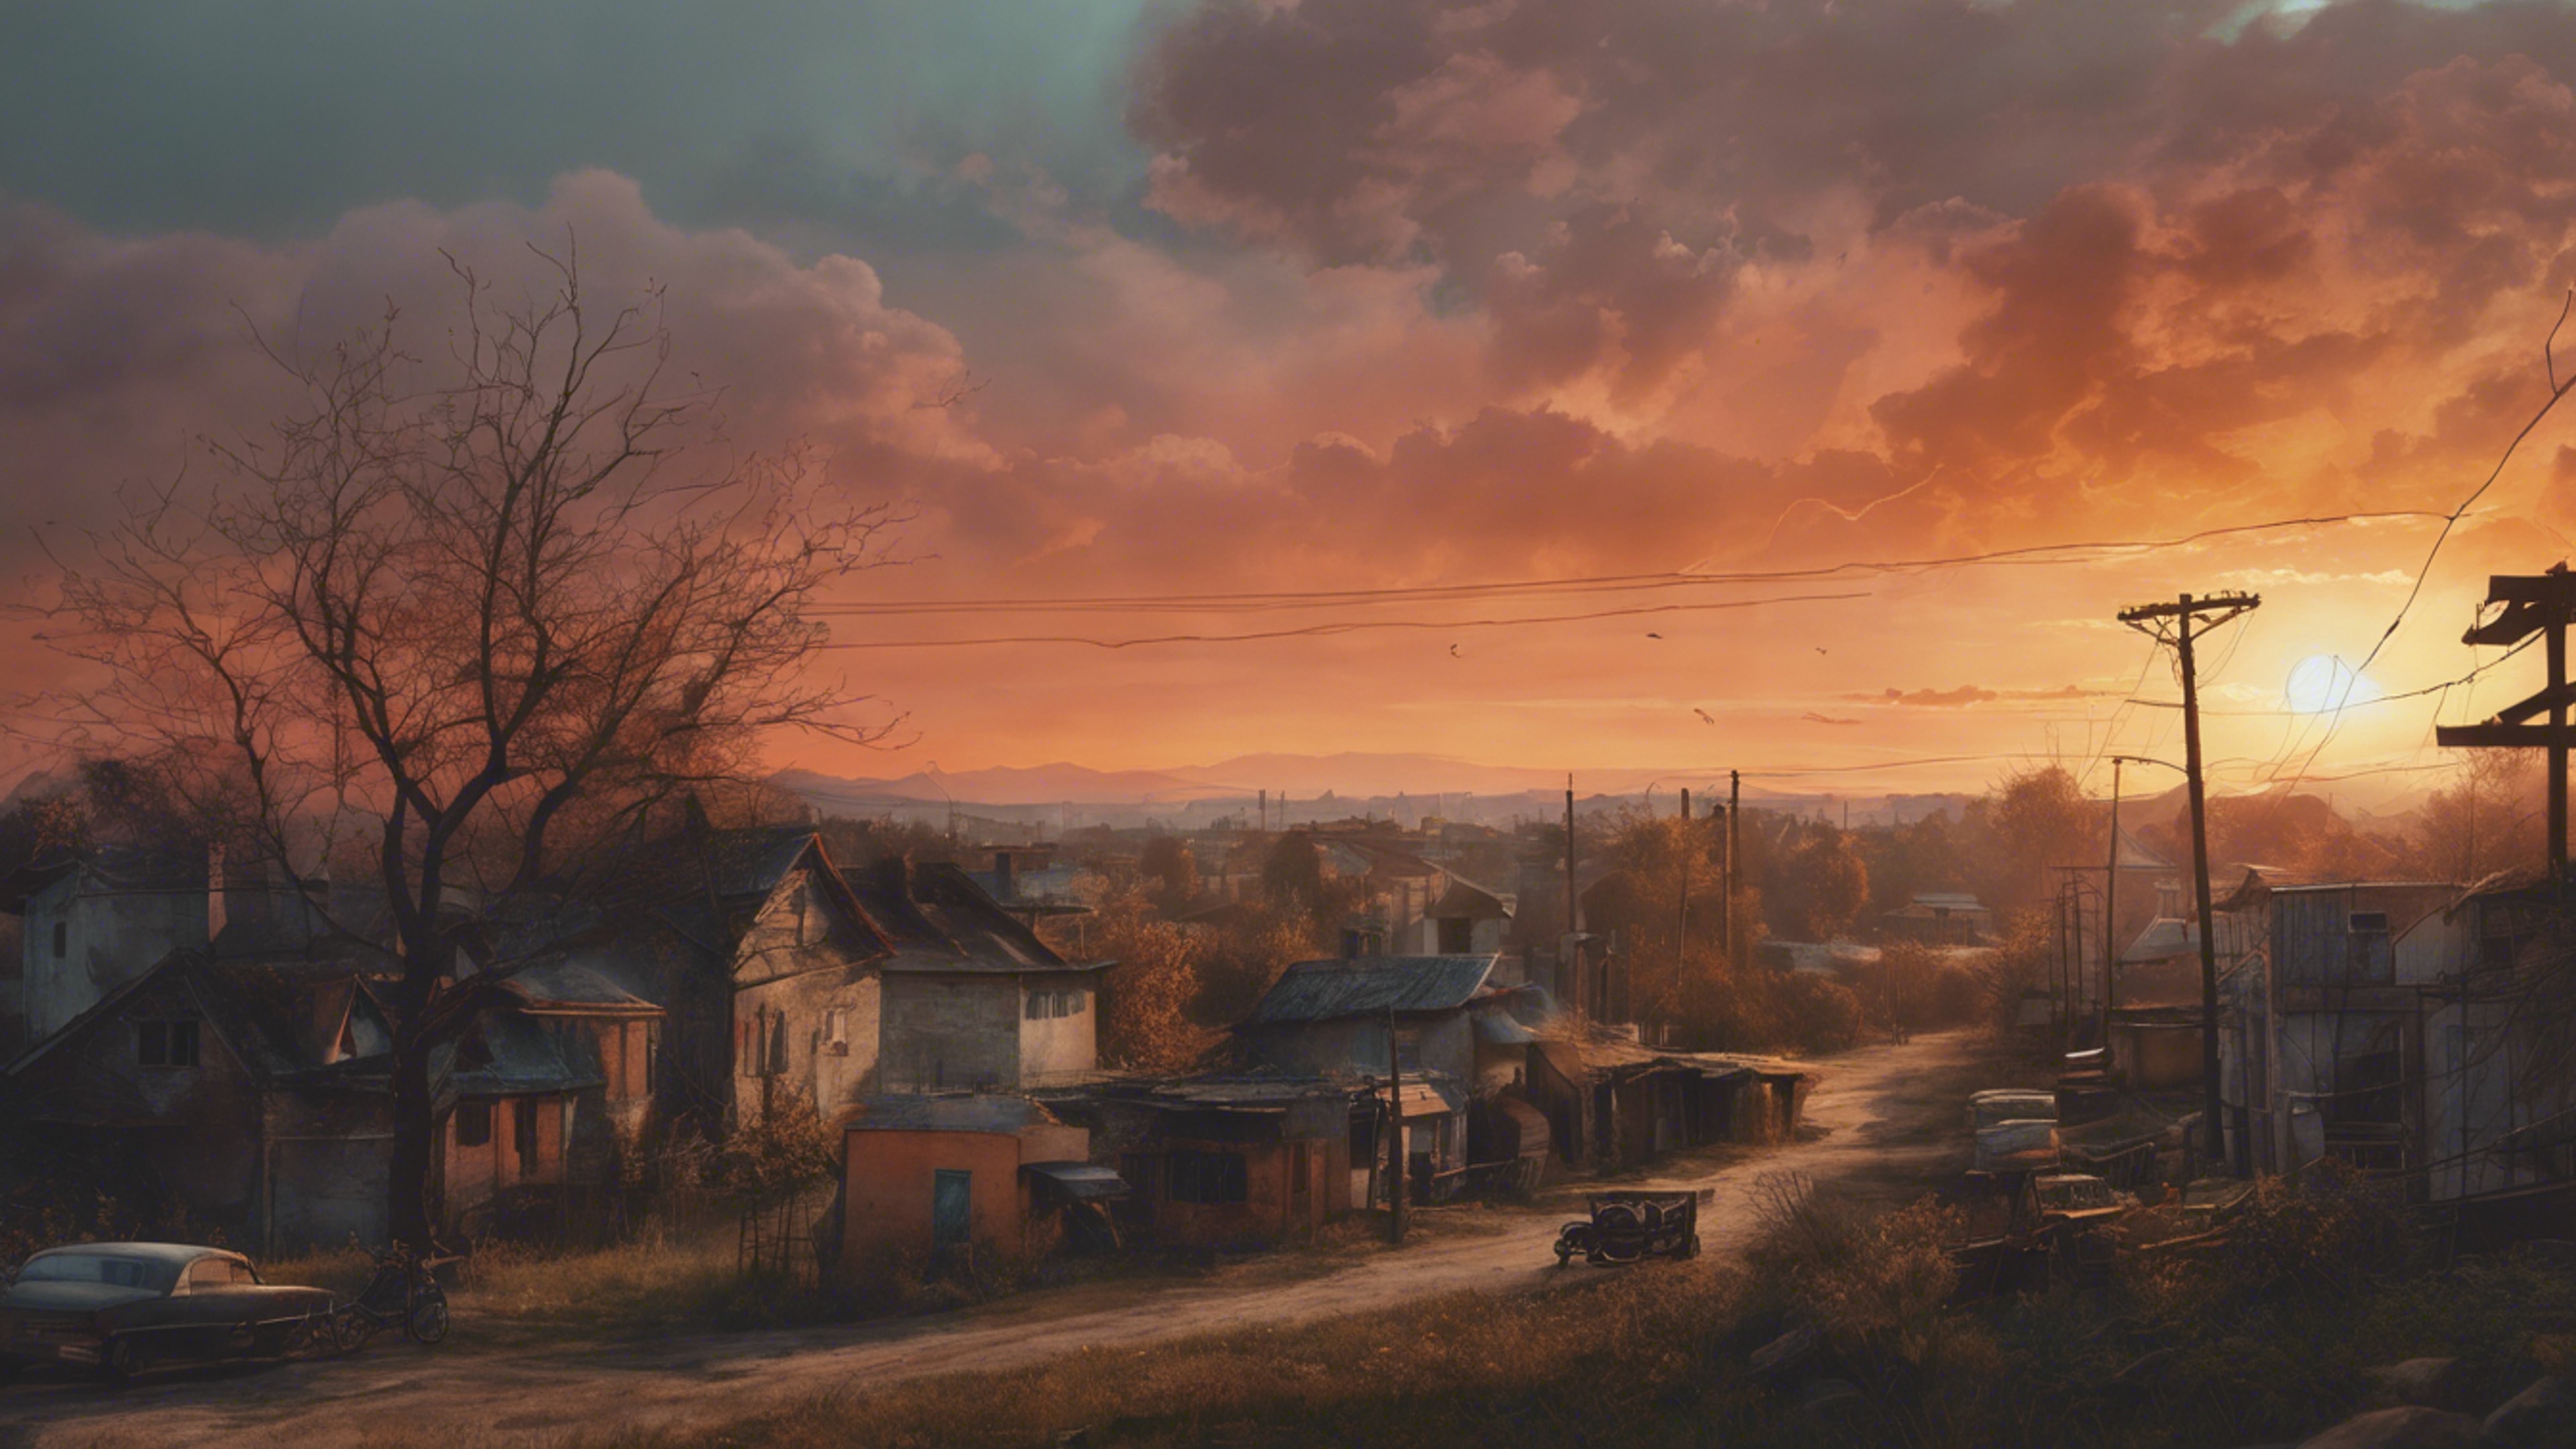 An evocative painting of a nostalgic sunset over a forgotten hometown. Ταπετσαρία[c4b7fcd1dd4d40f1b7ab]